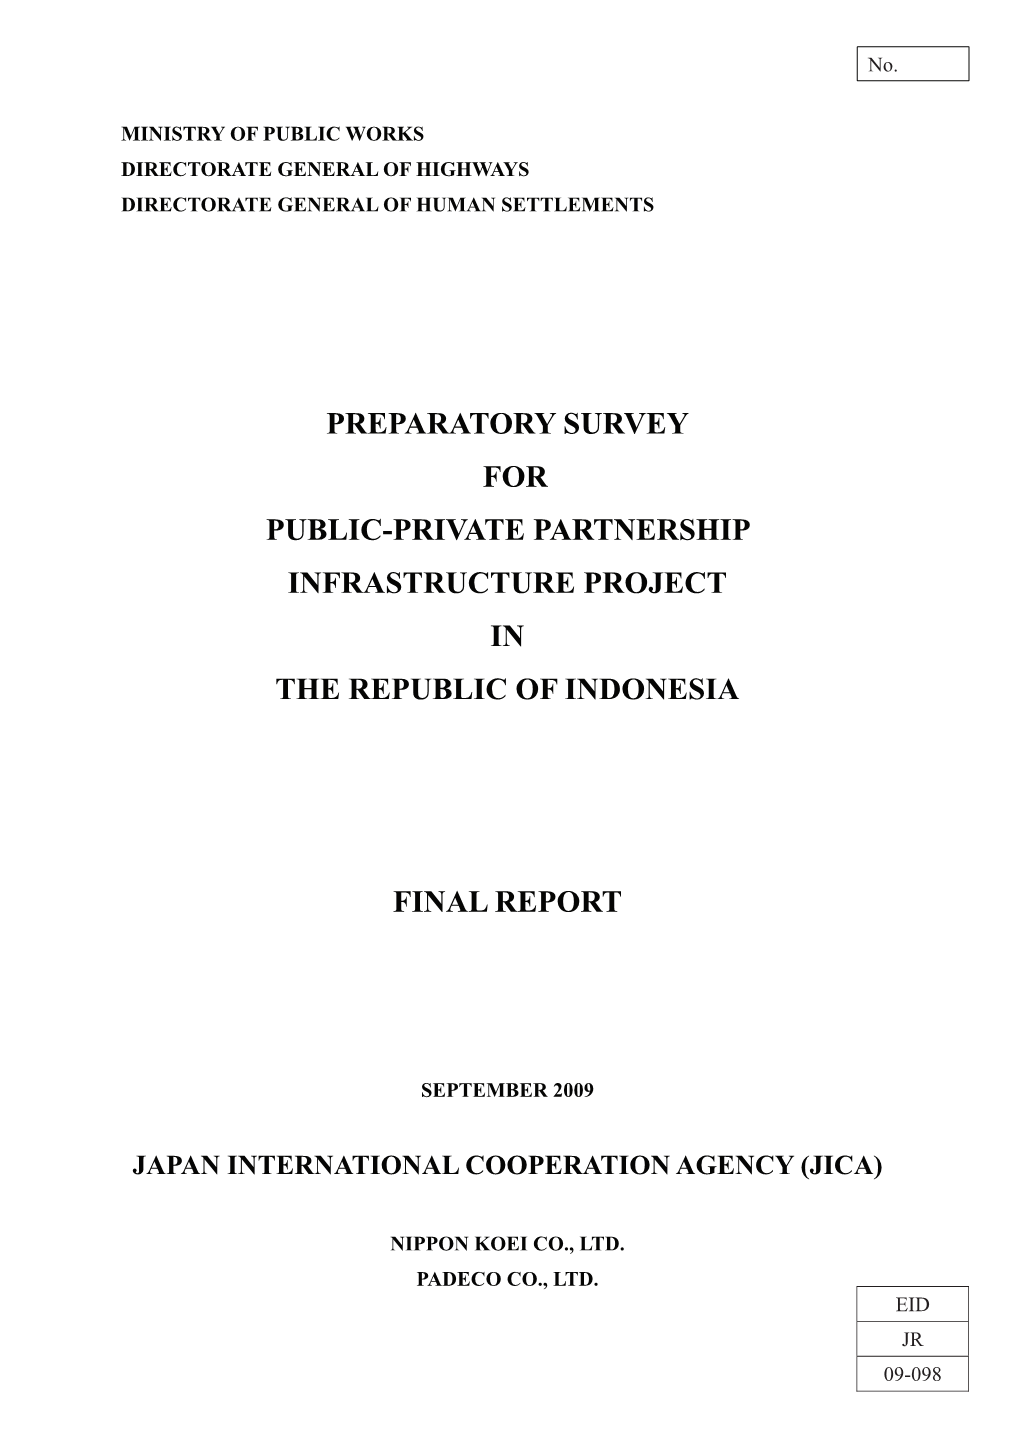 Preparatory Survey for Public-Private Partnership Infrastructure Project in the Republic of Indonesia